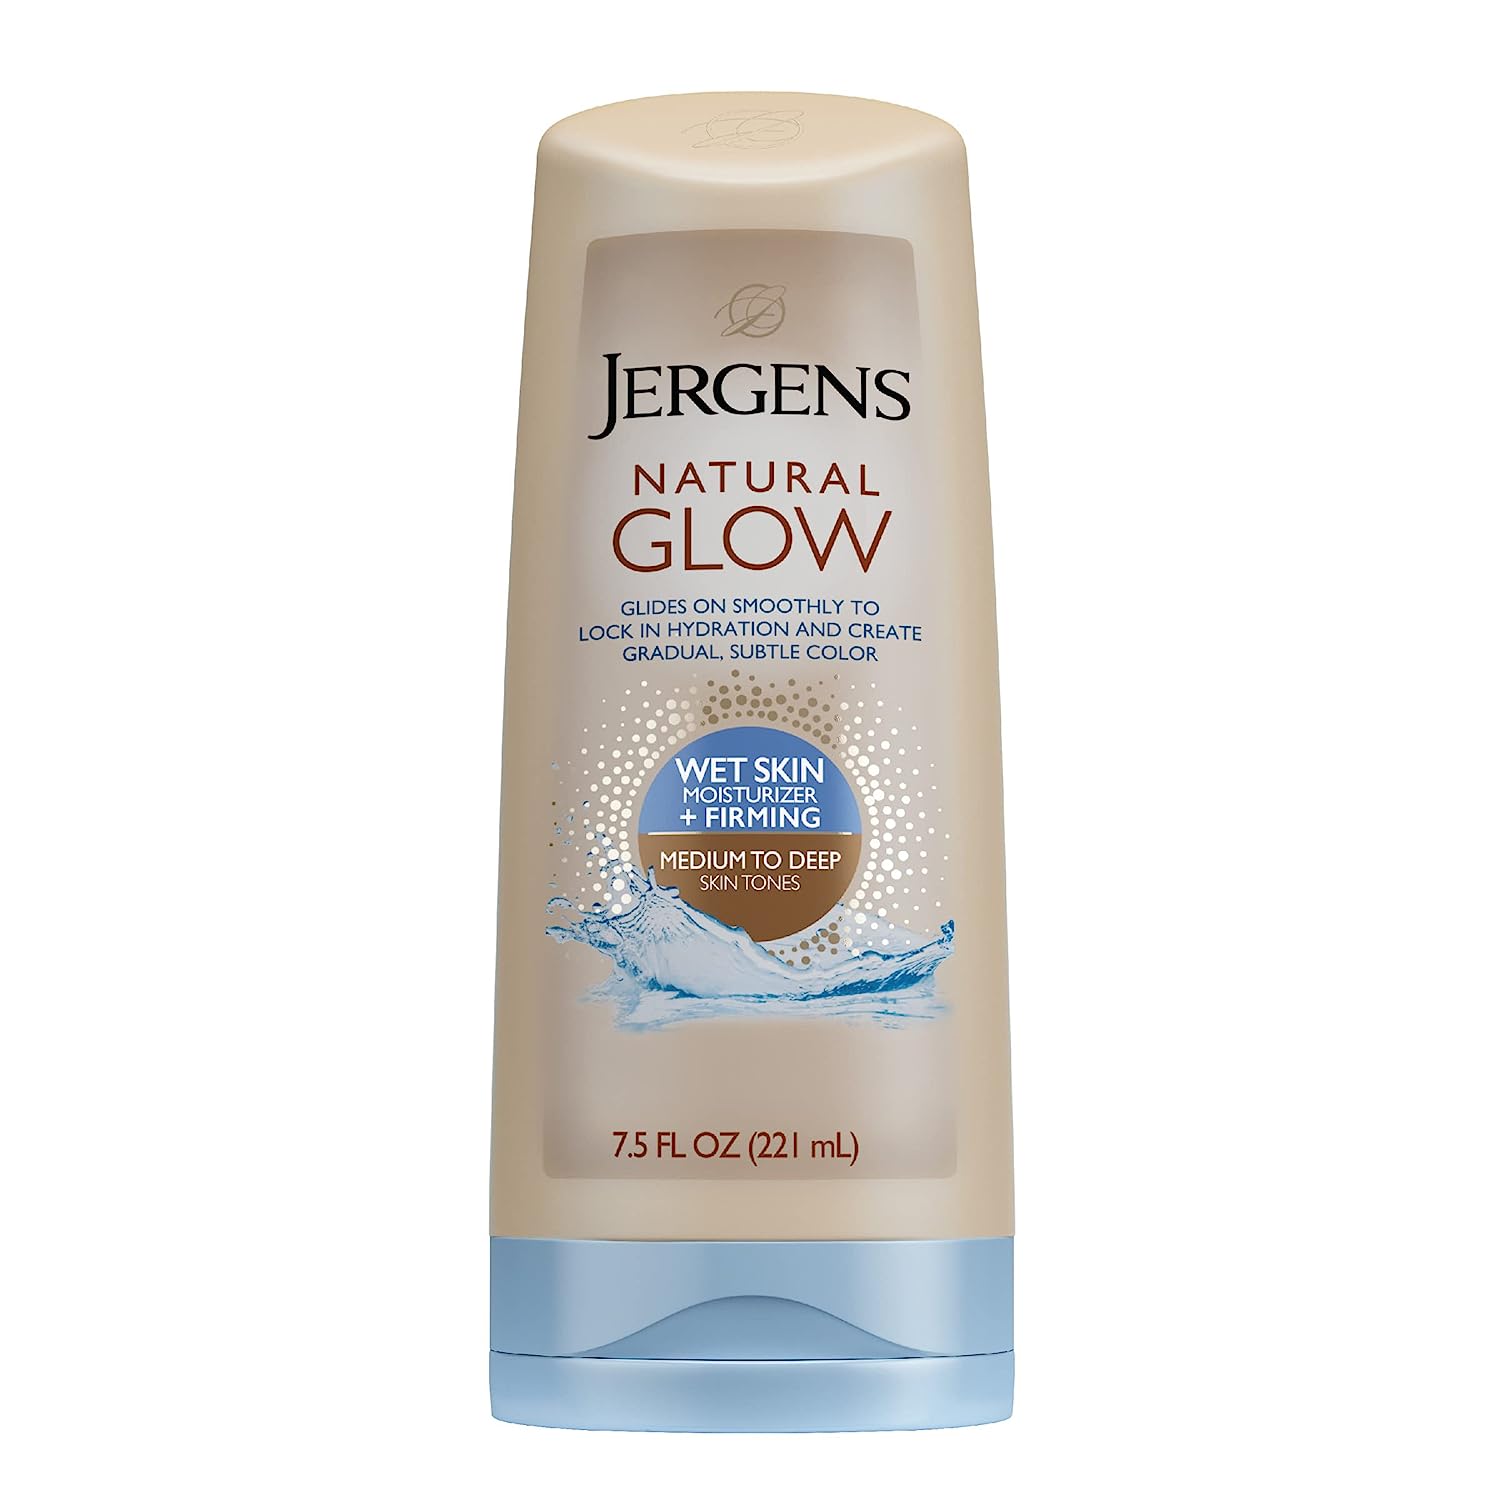 Jergens Natural Glow +FIRMING In-shower Self Tanner [...]